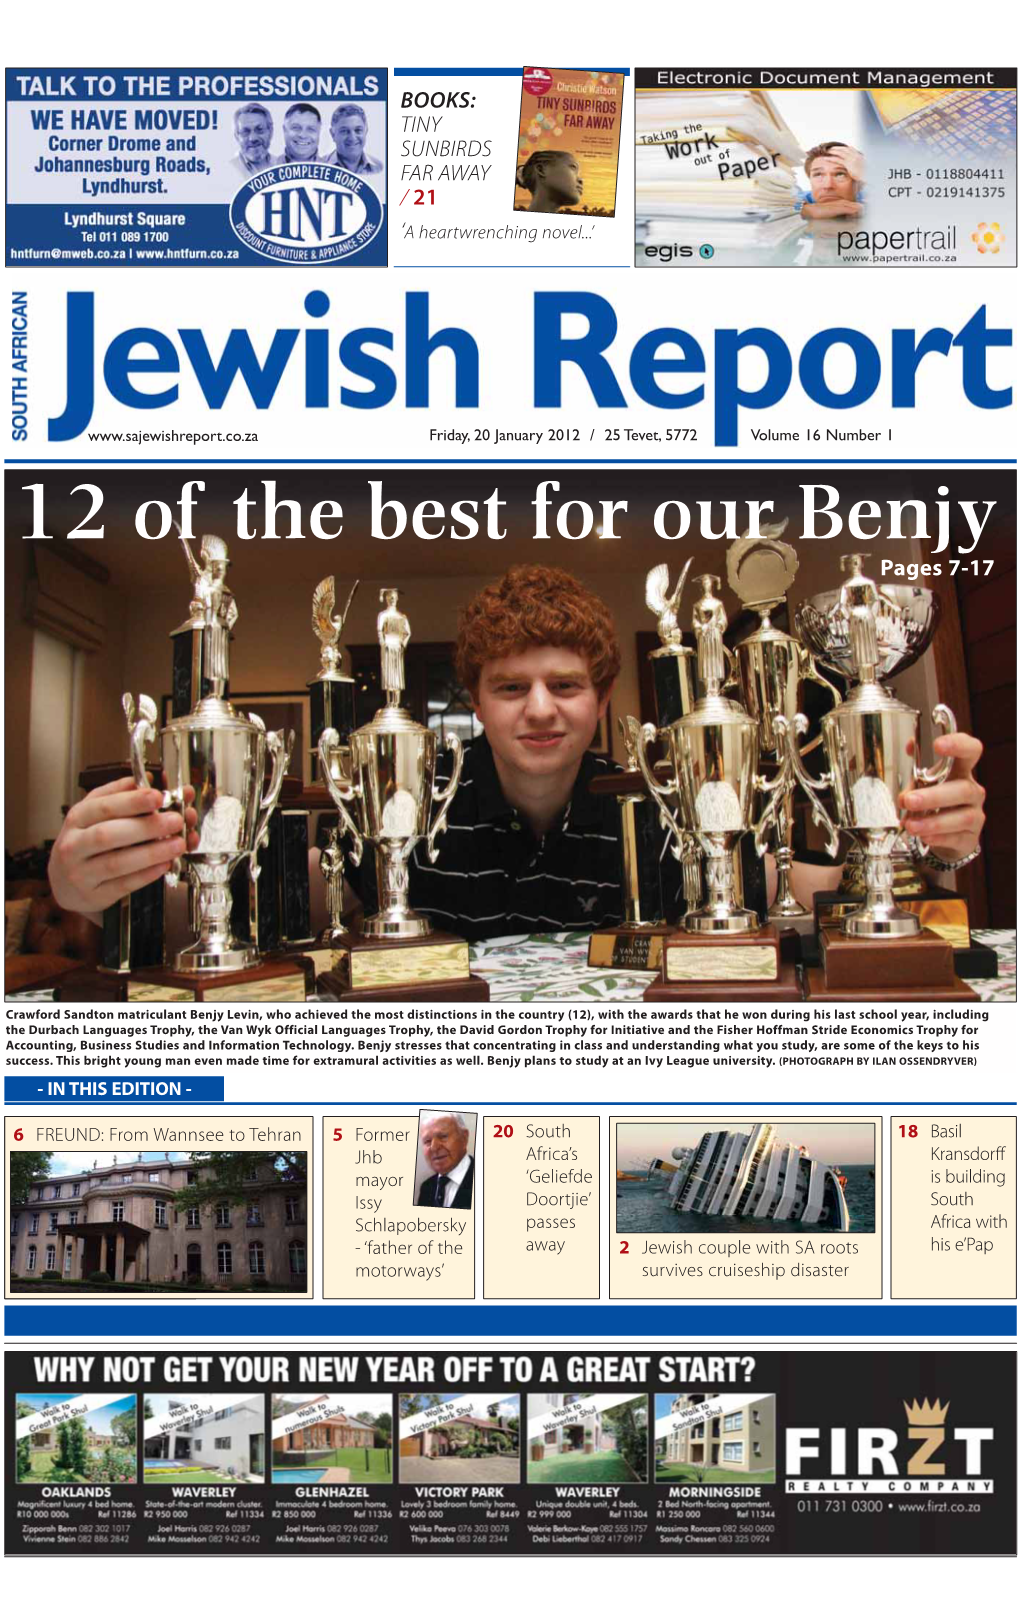 20 January 2012 / 25 Tevet, 5772 Volume 16 Number 1 12 of the Best for Our Benjy Pages 7-17